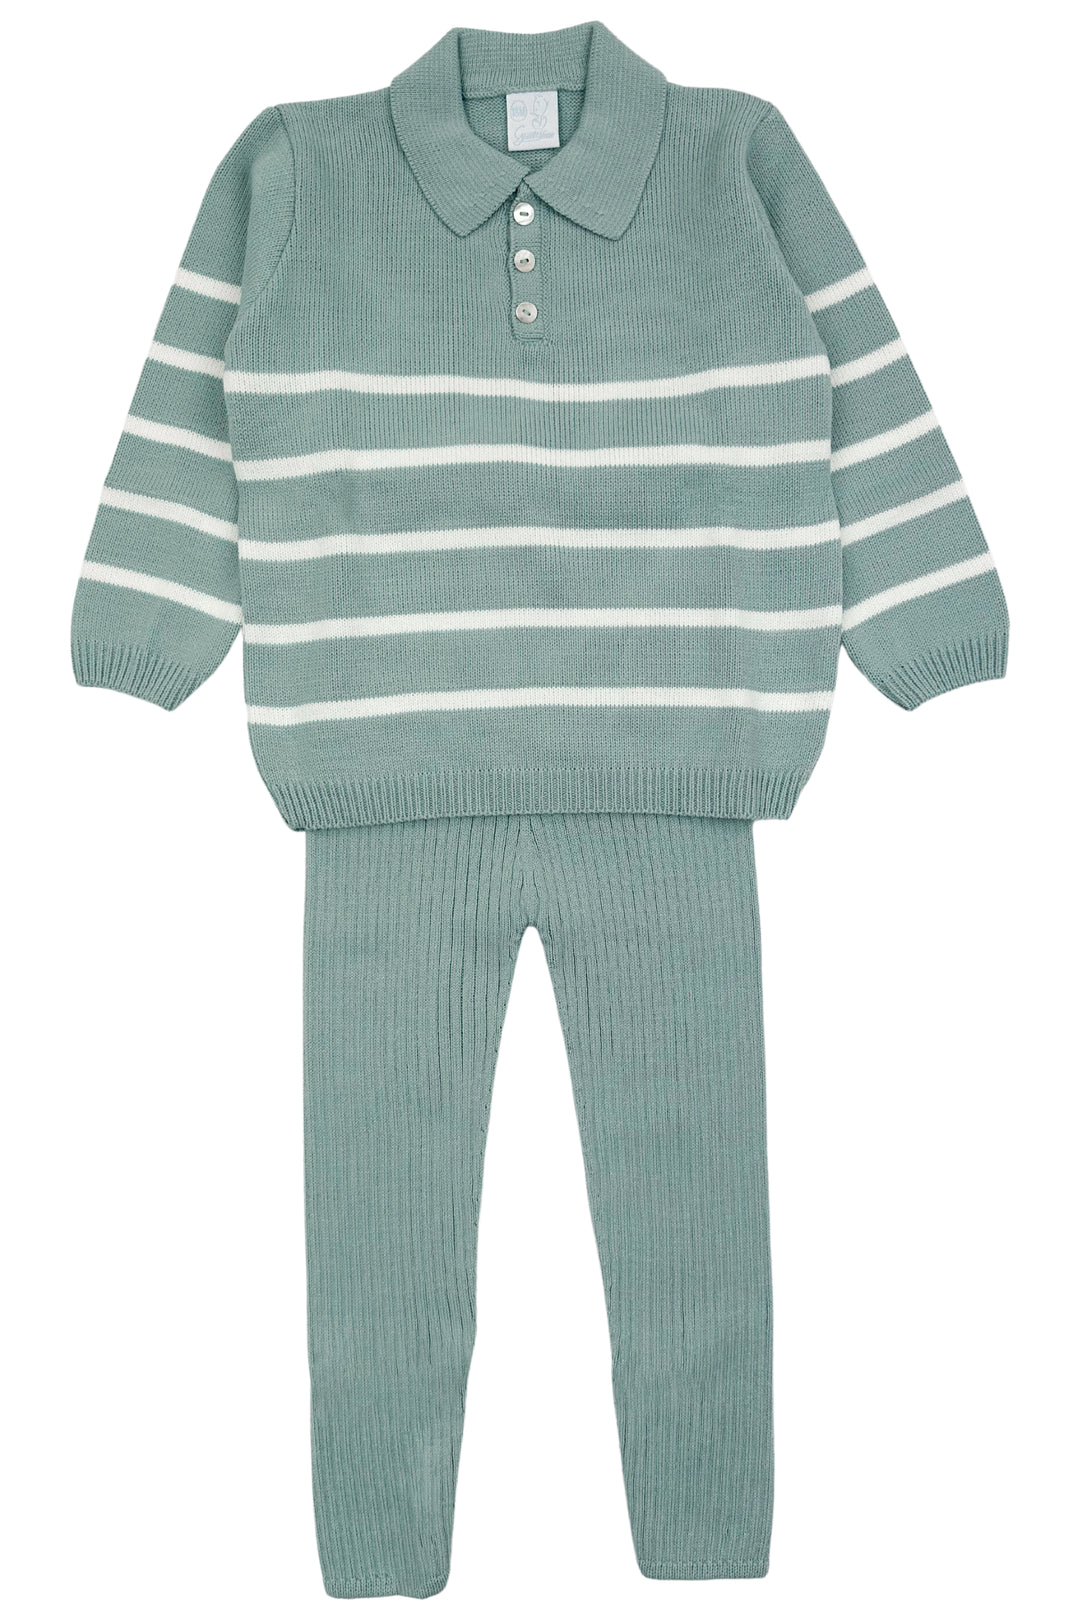 Granlei "Tommy" Sage Green Striped Knit Top & Leggings | Millie and John